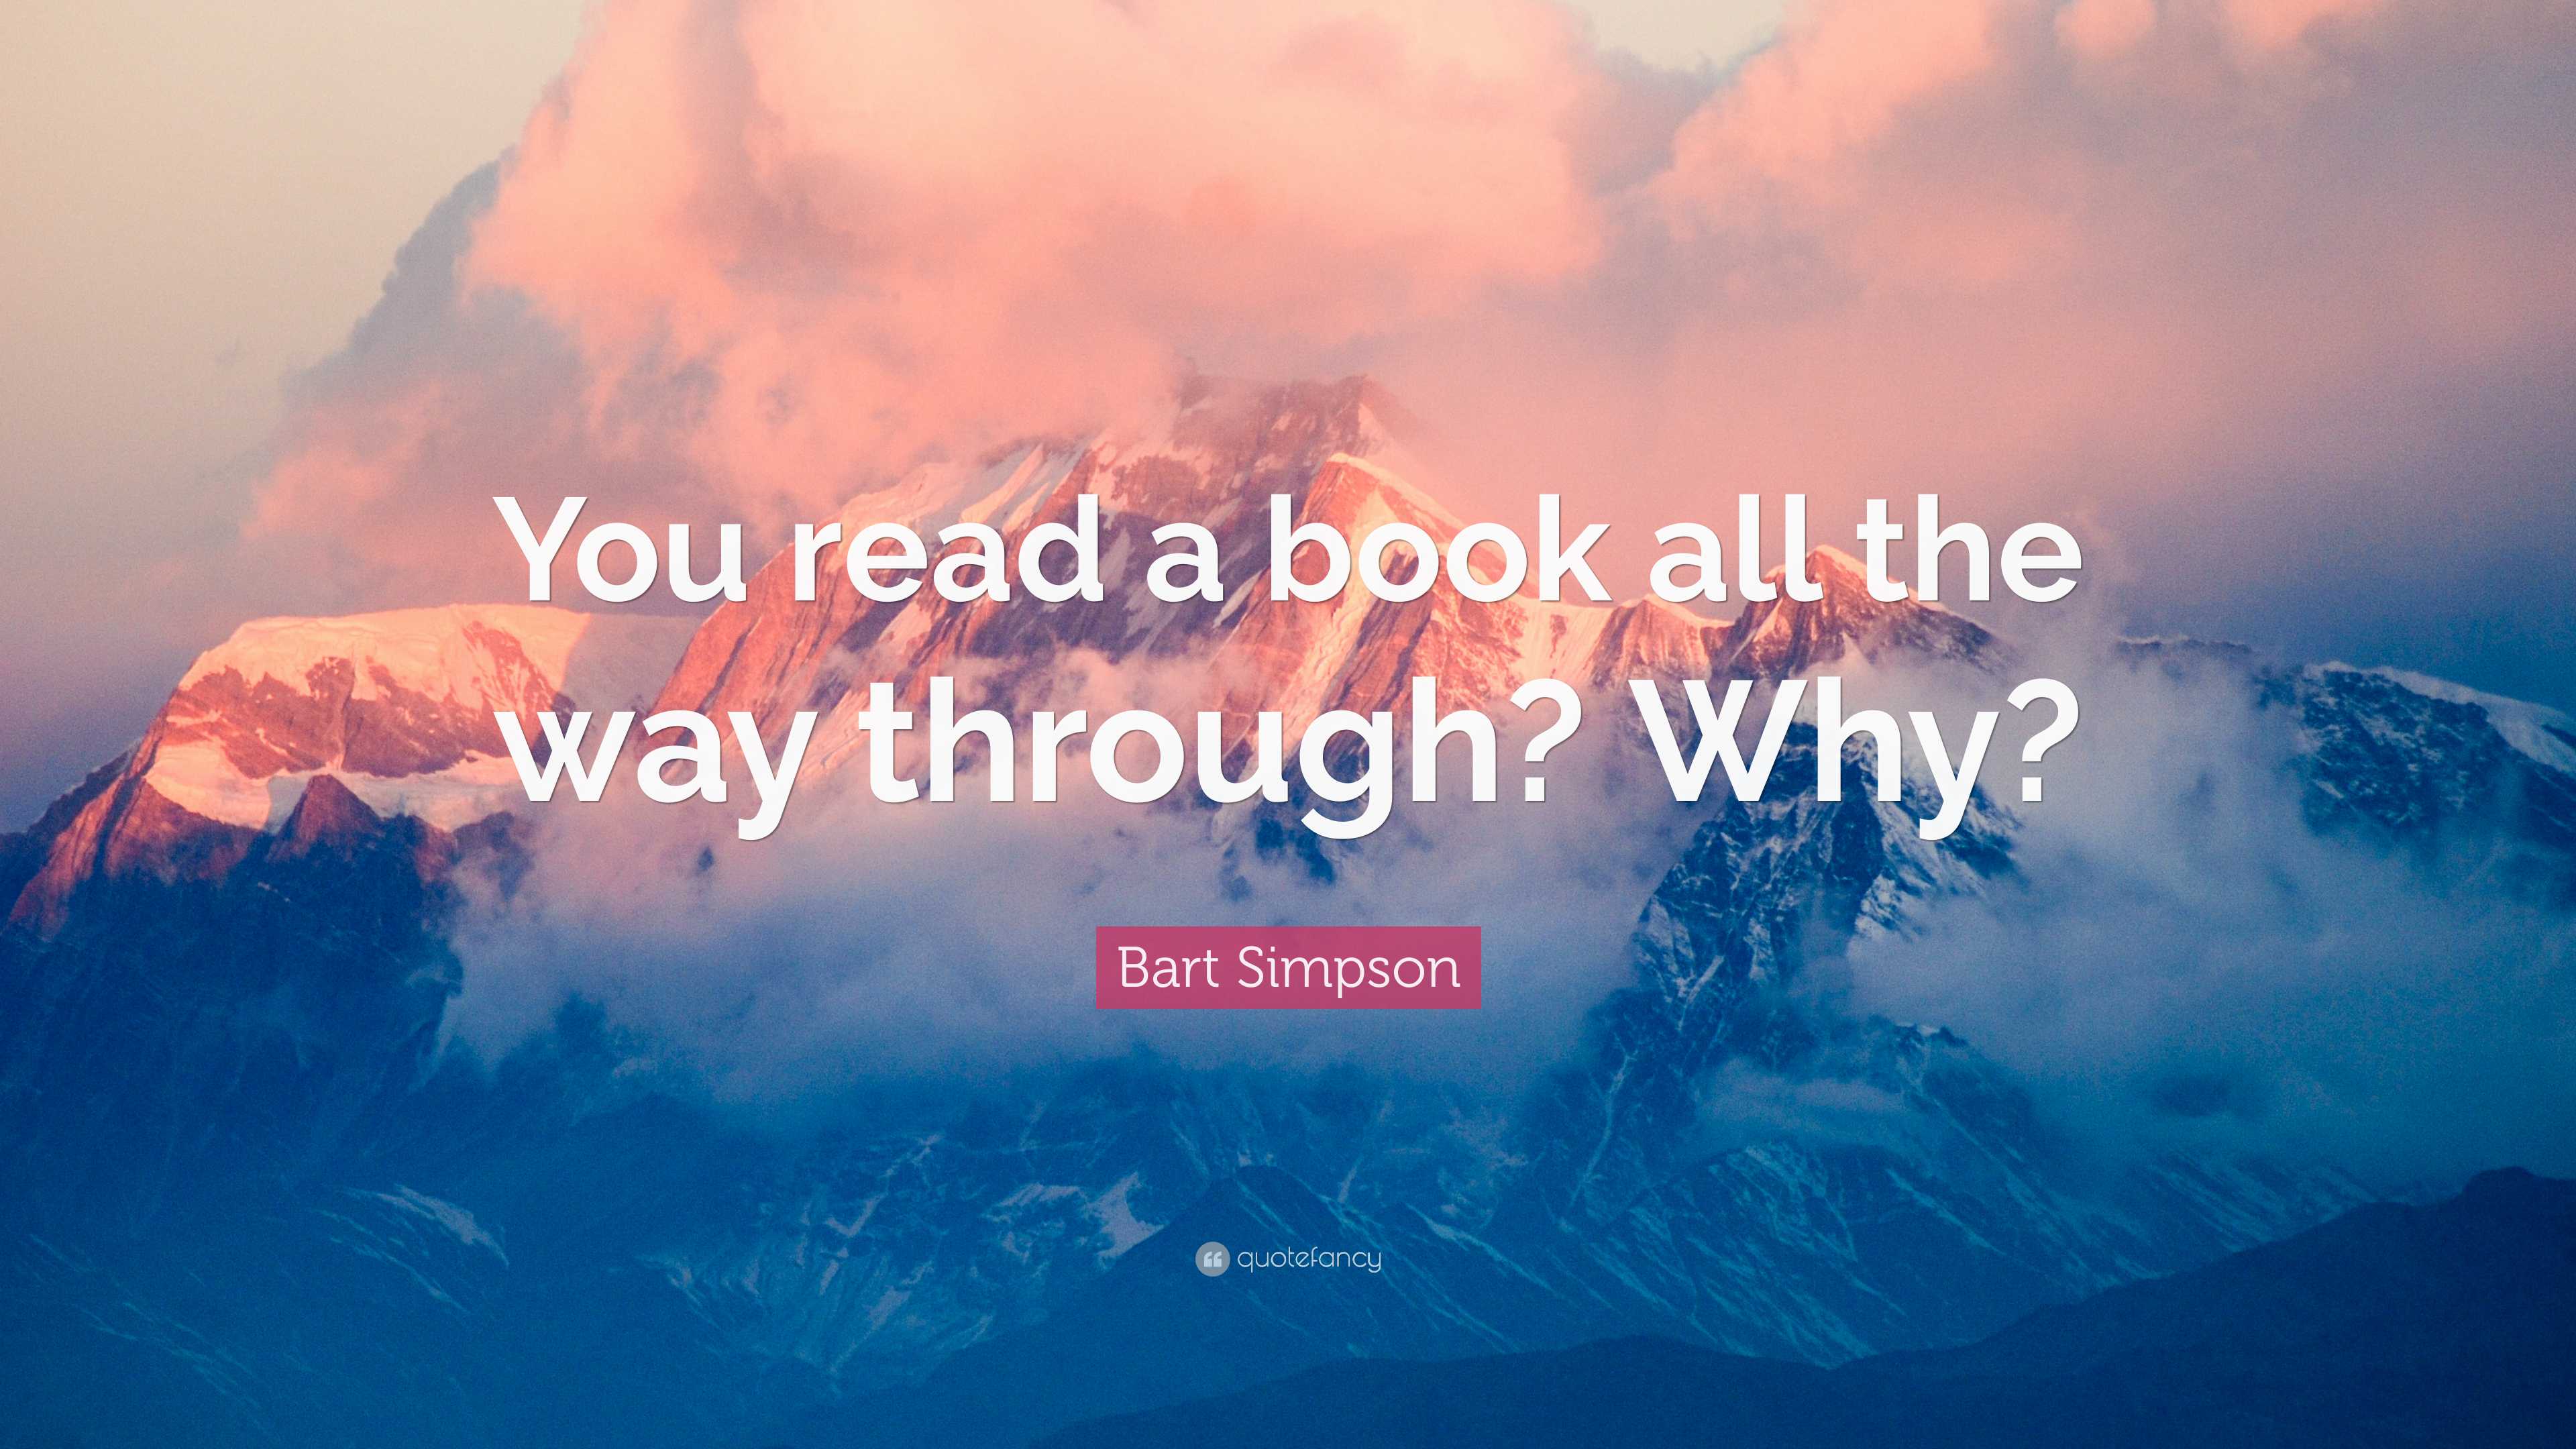 Bart Simpson Quote: “You read a book all the way through? Why?”